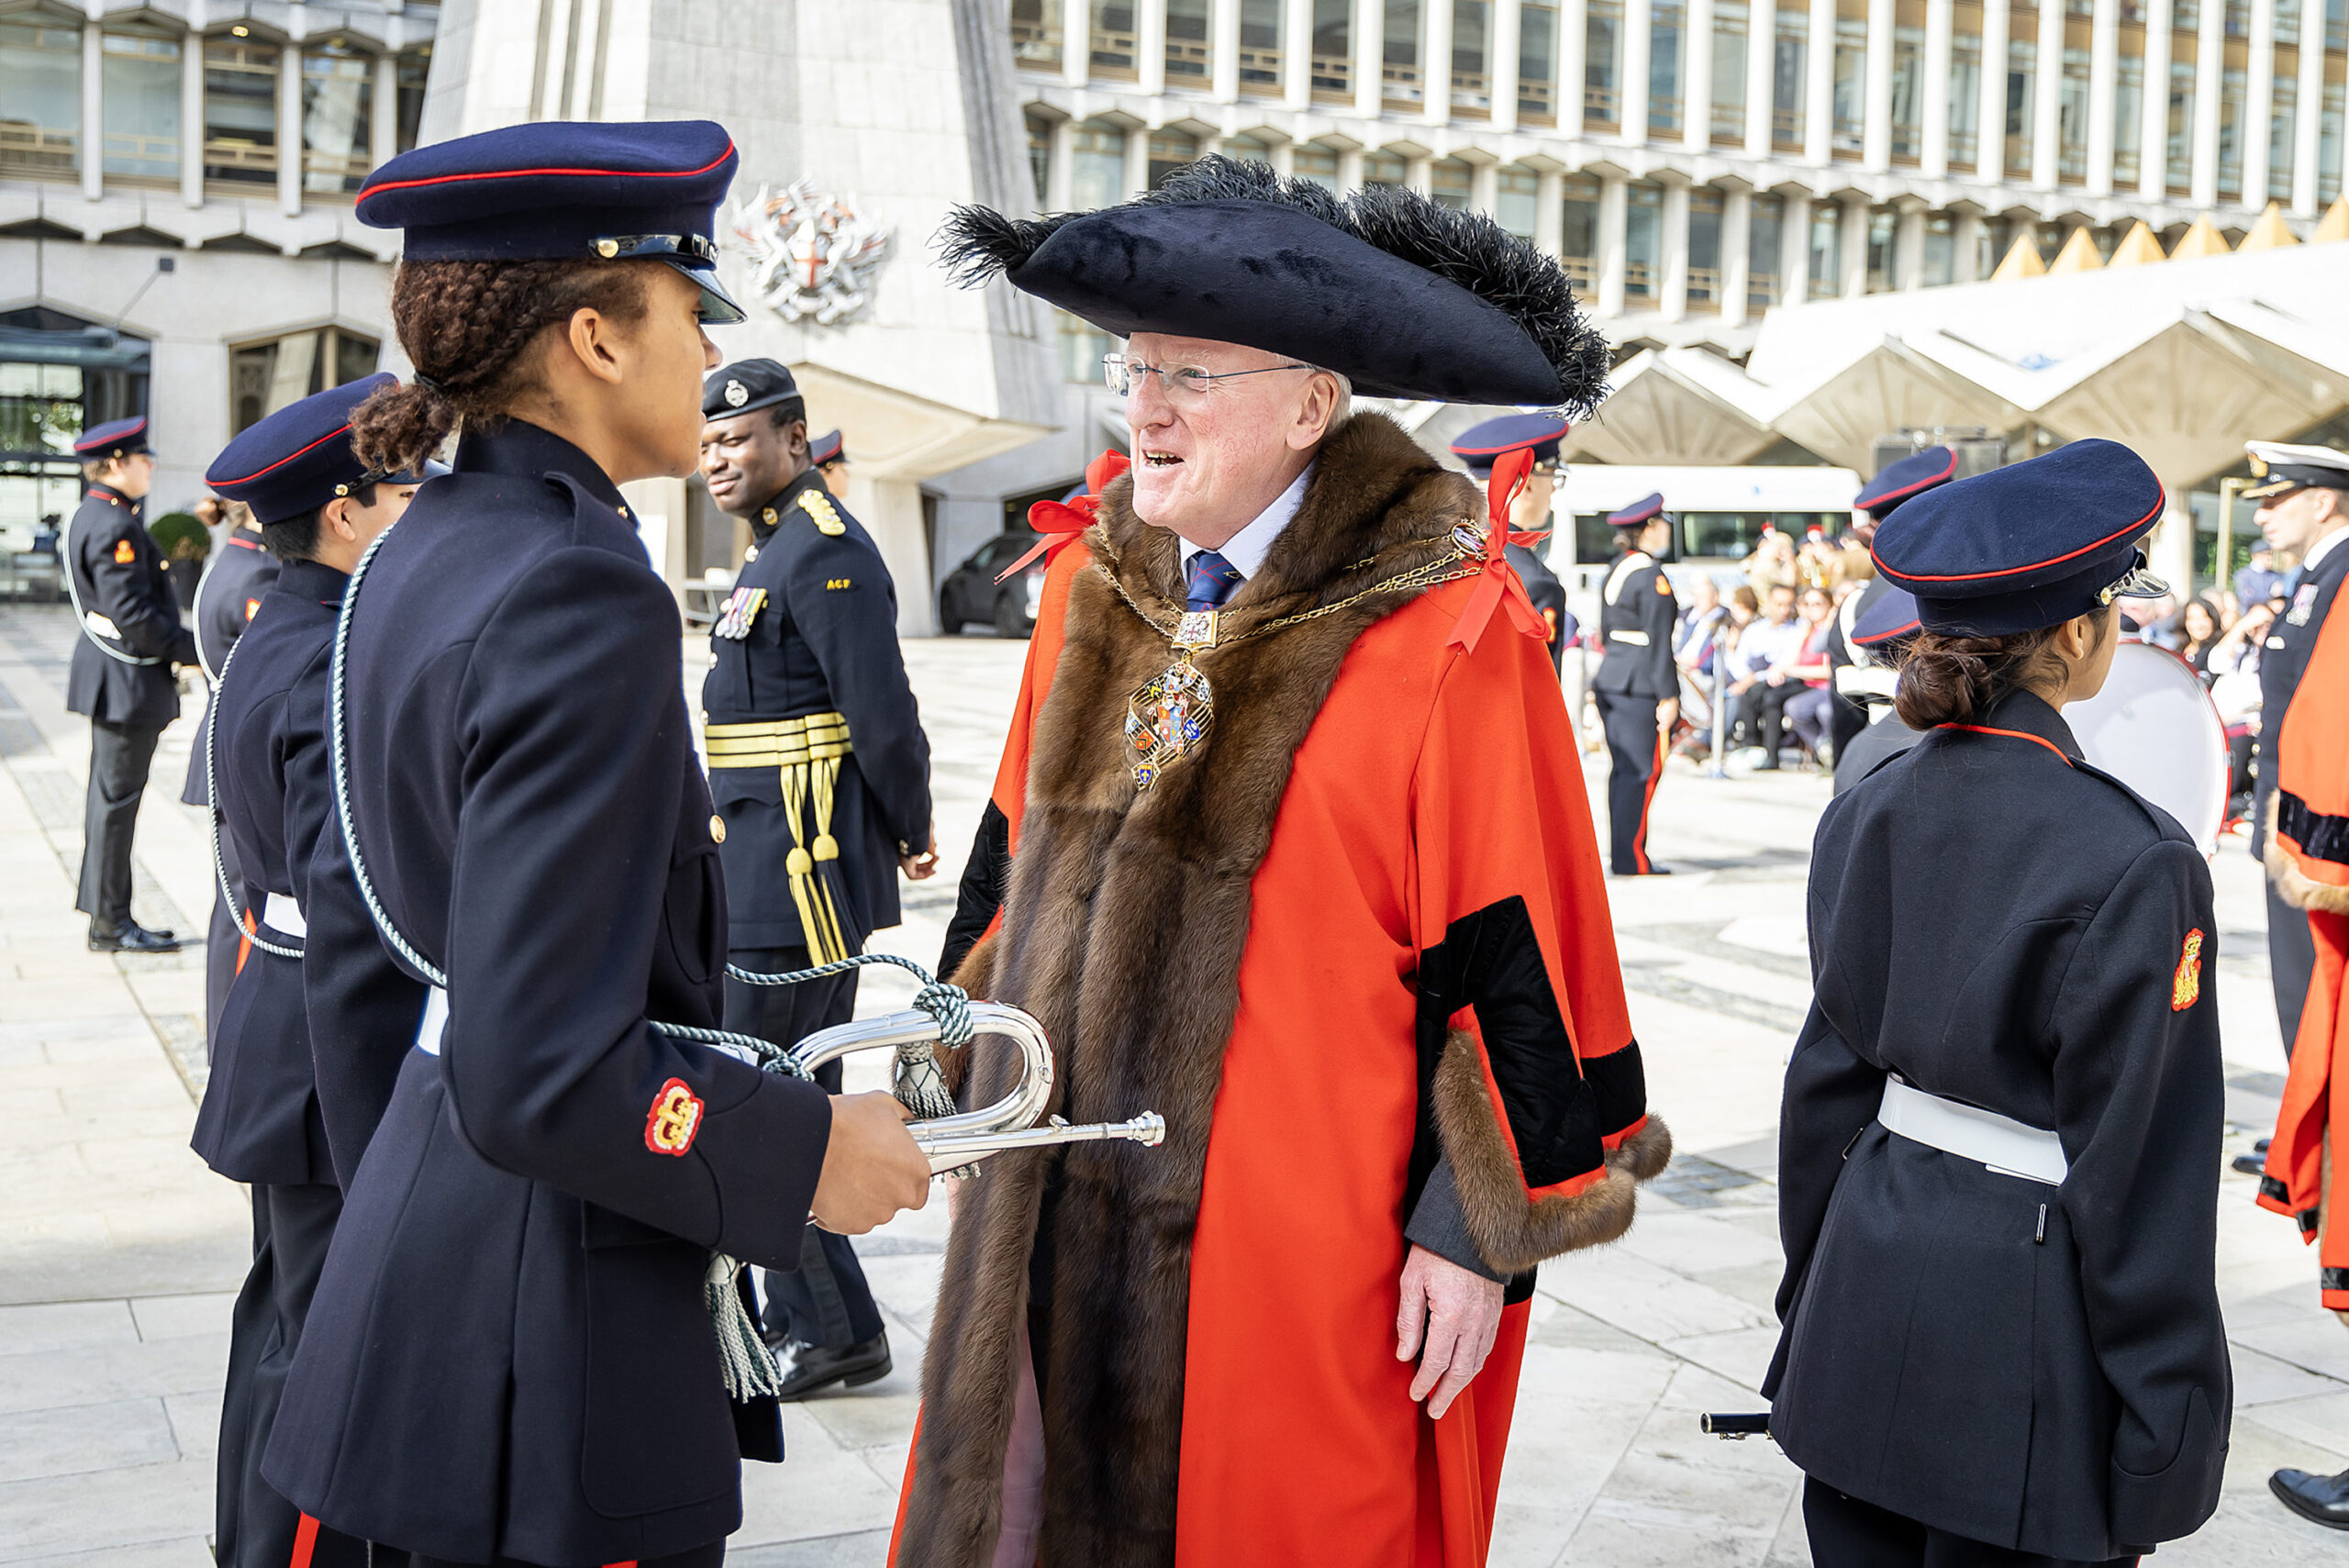 Lord Mayor of City of London talking to a music cadet at the Guildhall Yard